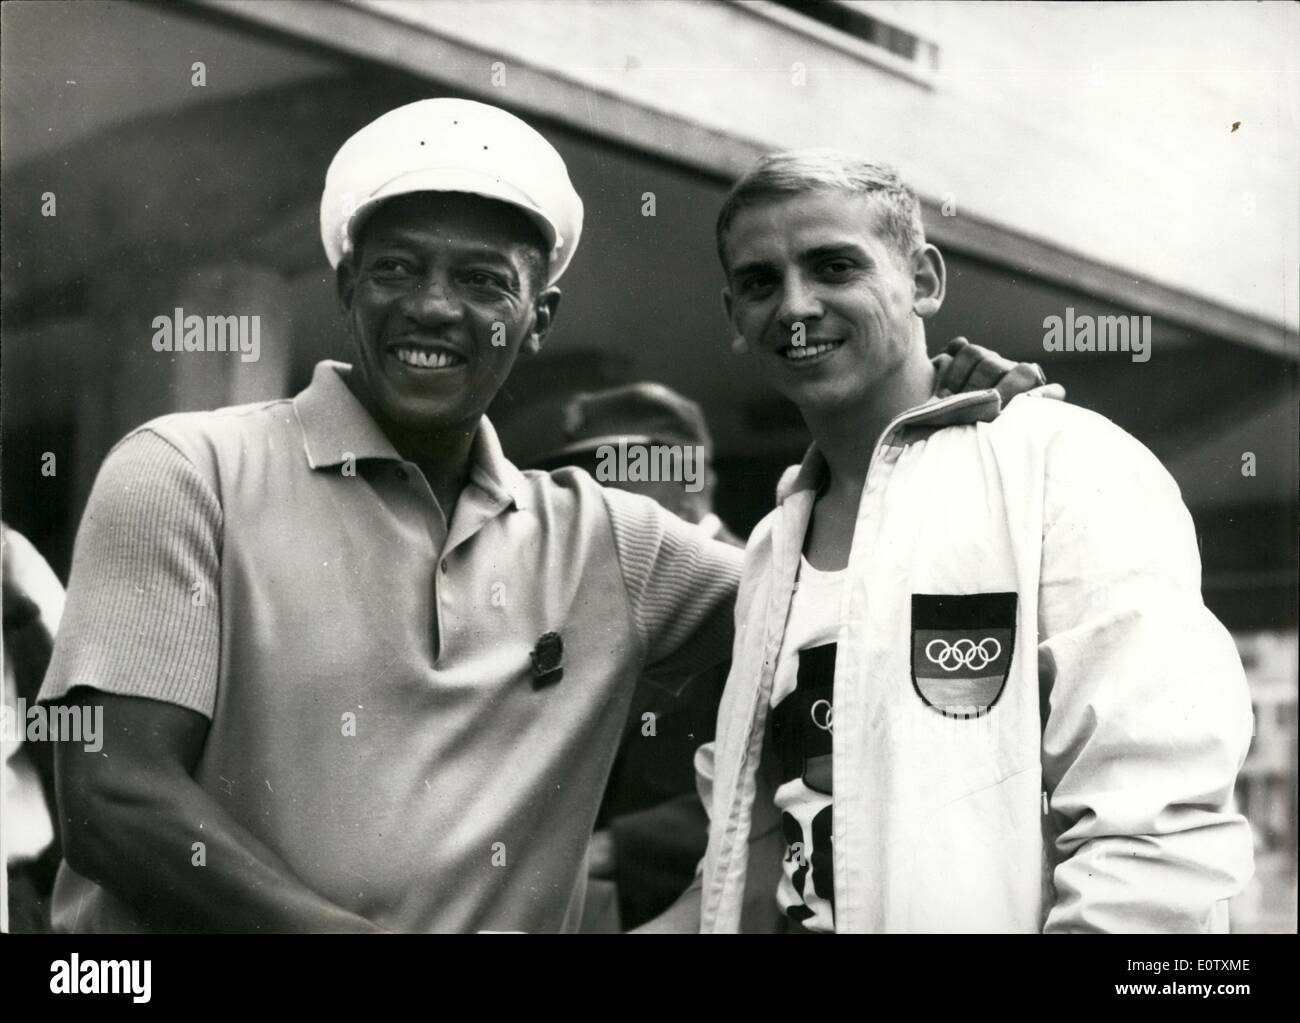 Sep. 09, 1960 - The 1960 Olympic Games In Rome. The Old Champion Meets The New. Photo Shows:- Former Olympic champion Jesse Owens (left) is seen chatting to Armin Hary, of Germany, yesterday's gold medal winner of the 100 metres in Rome. Stock Photo